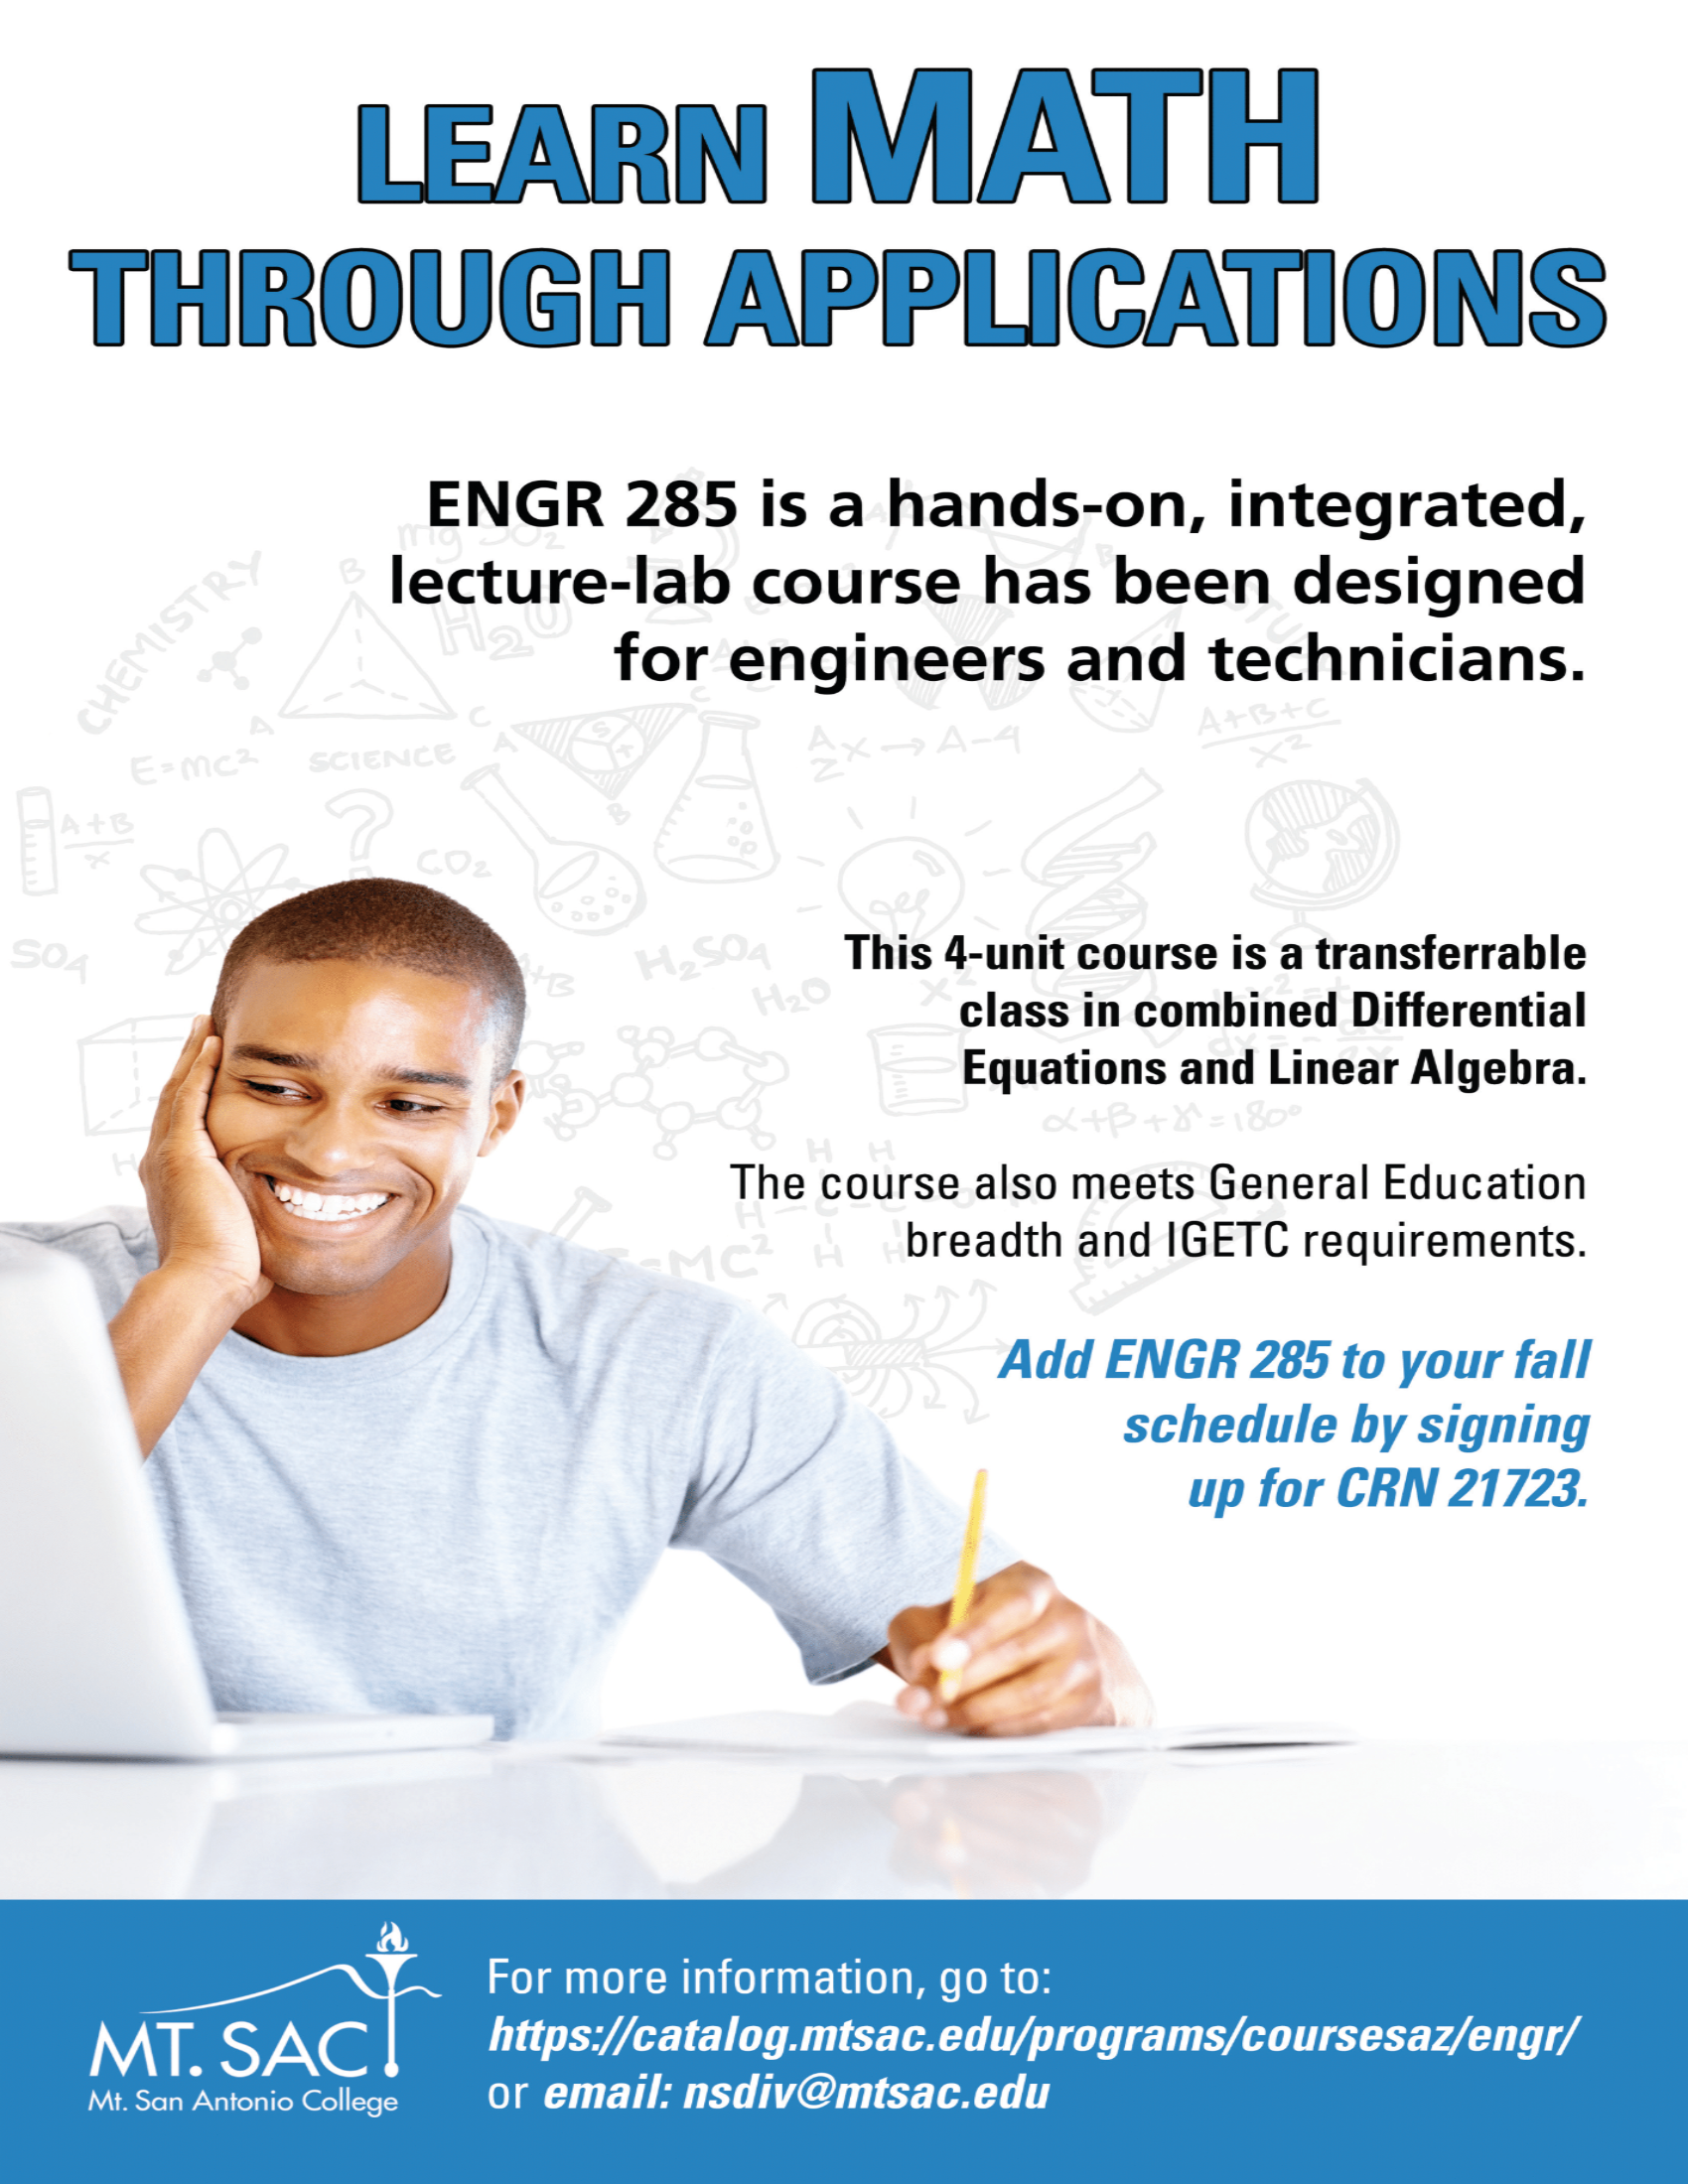 ENGR285 Course Advertisement for Fall 2021